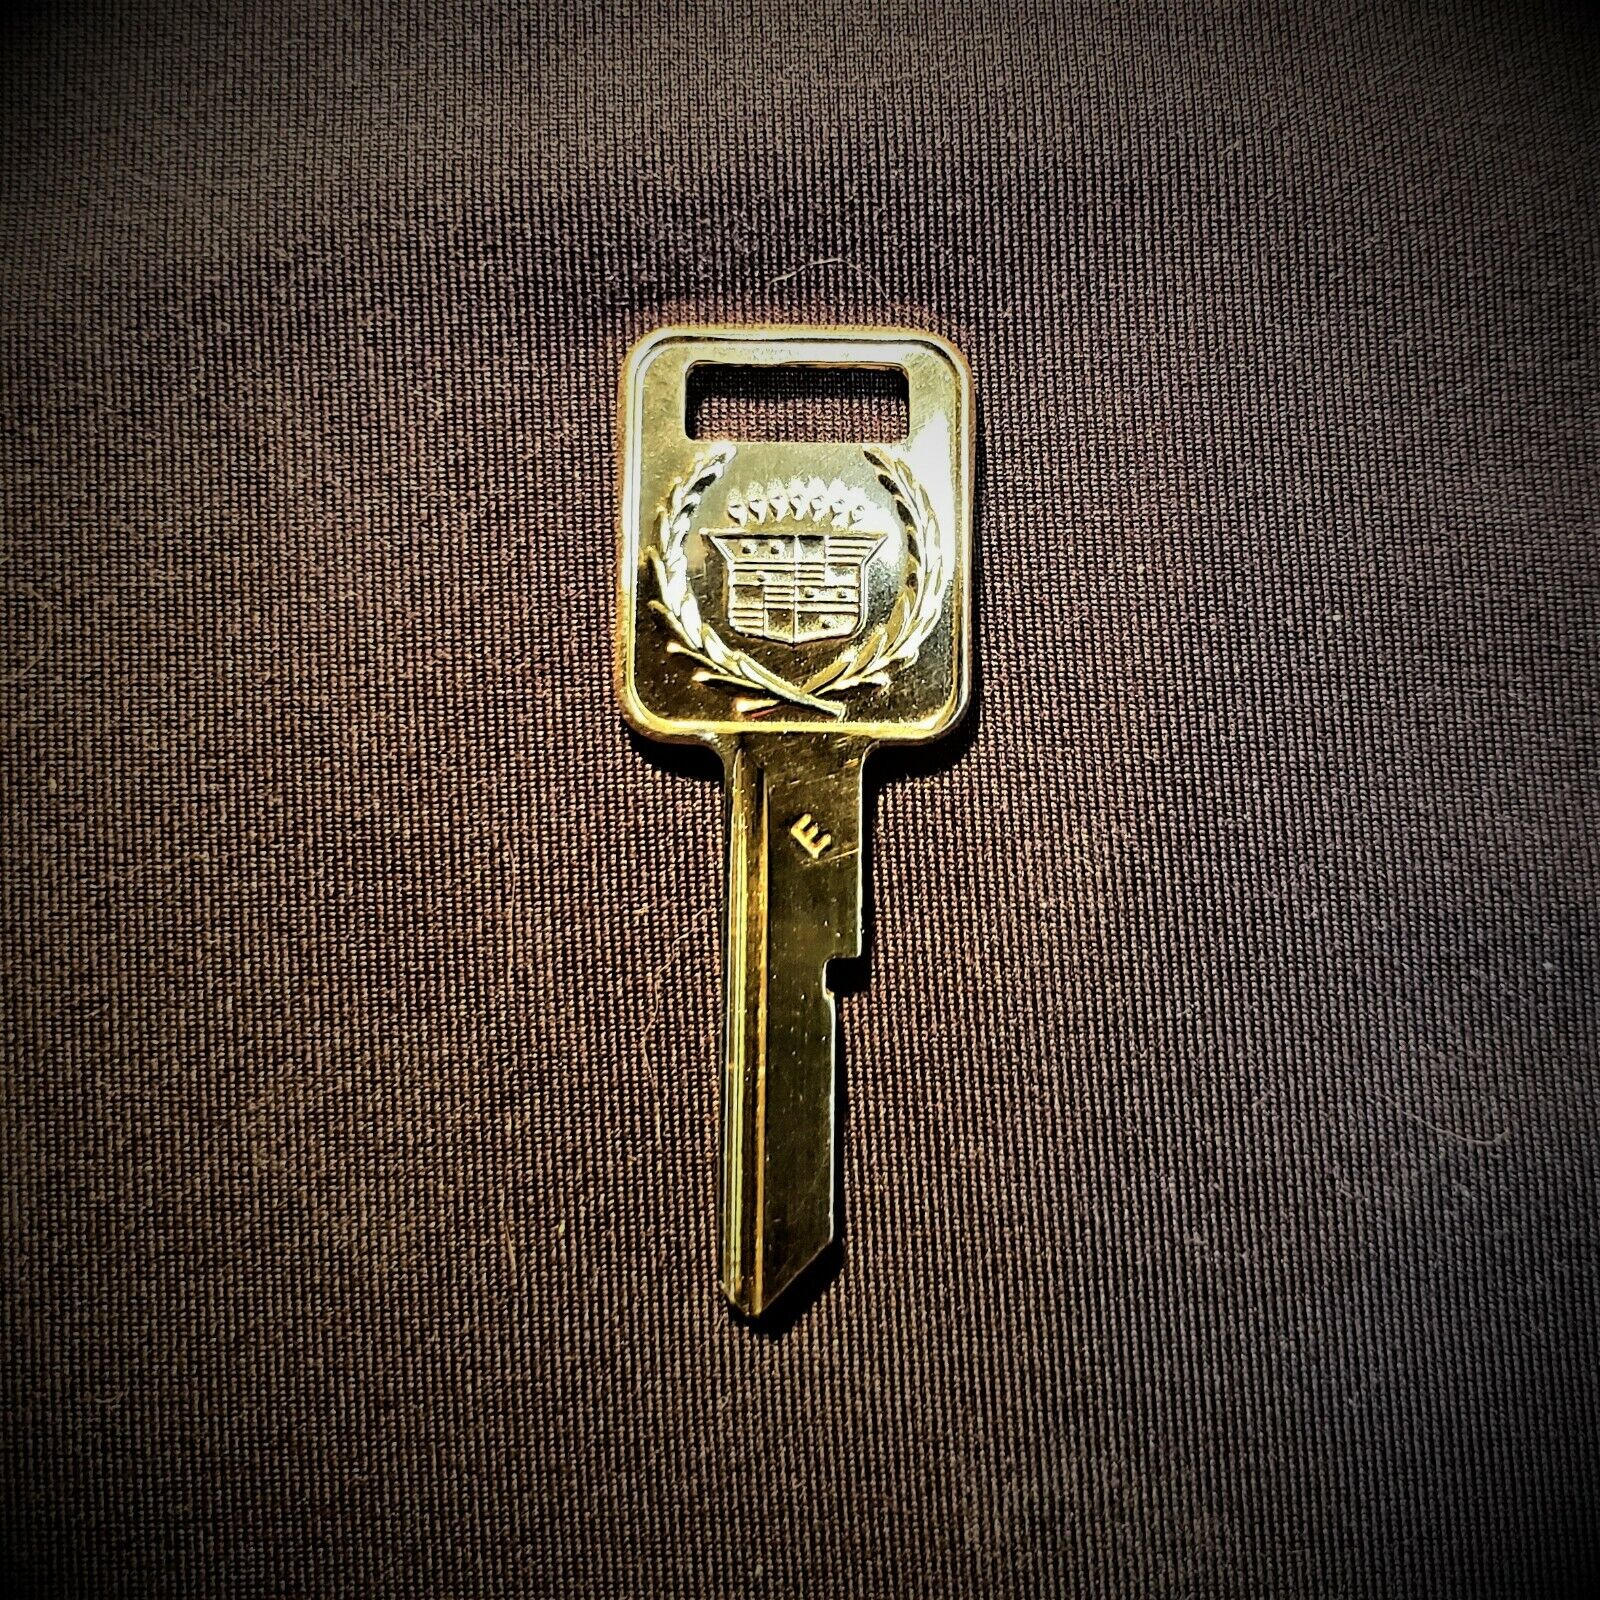 Rare Cadillac Gold Key - \'E\' Ignition for All Models - 1969, 1973, 1977, 1981